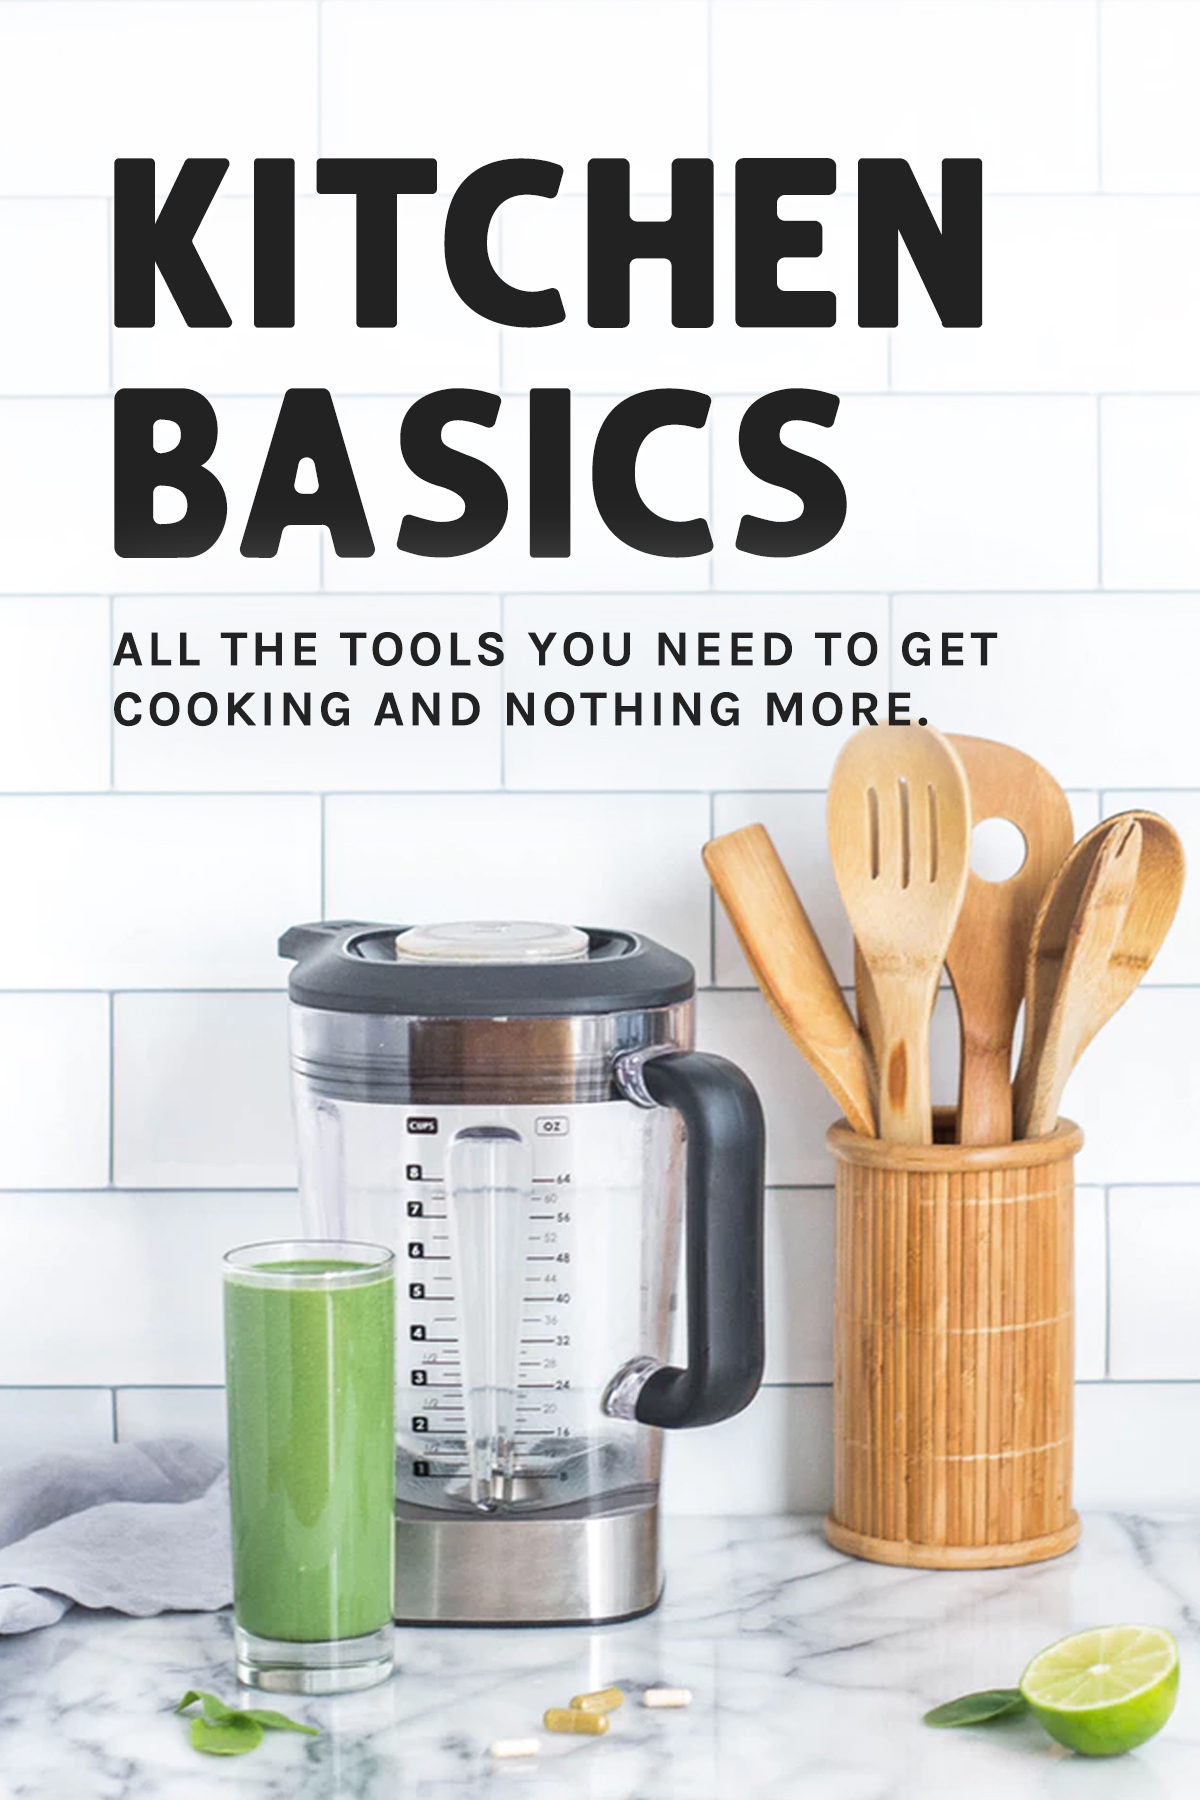 Essential kitchen tools you need and their uses